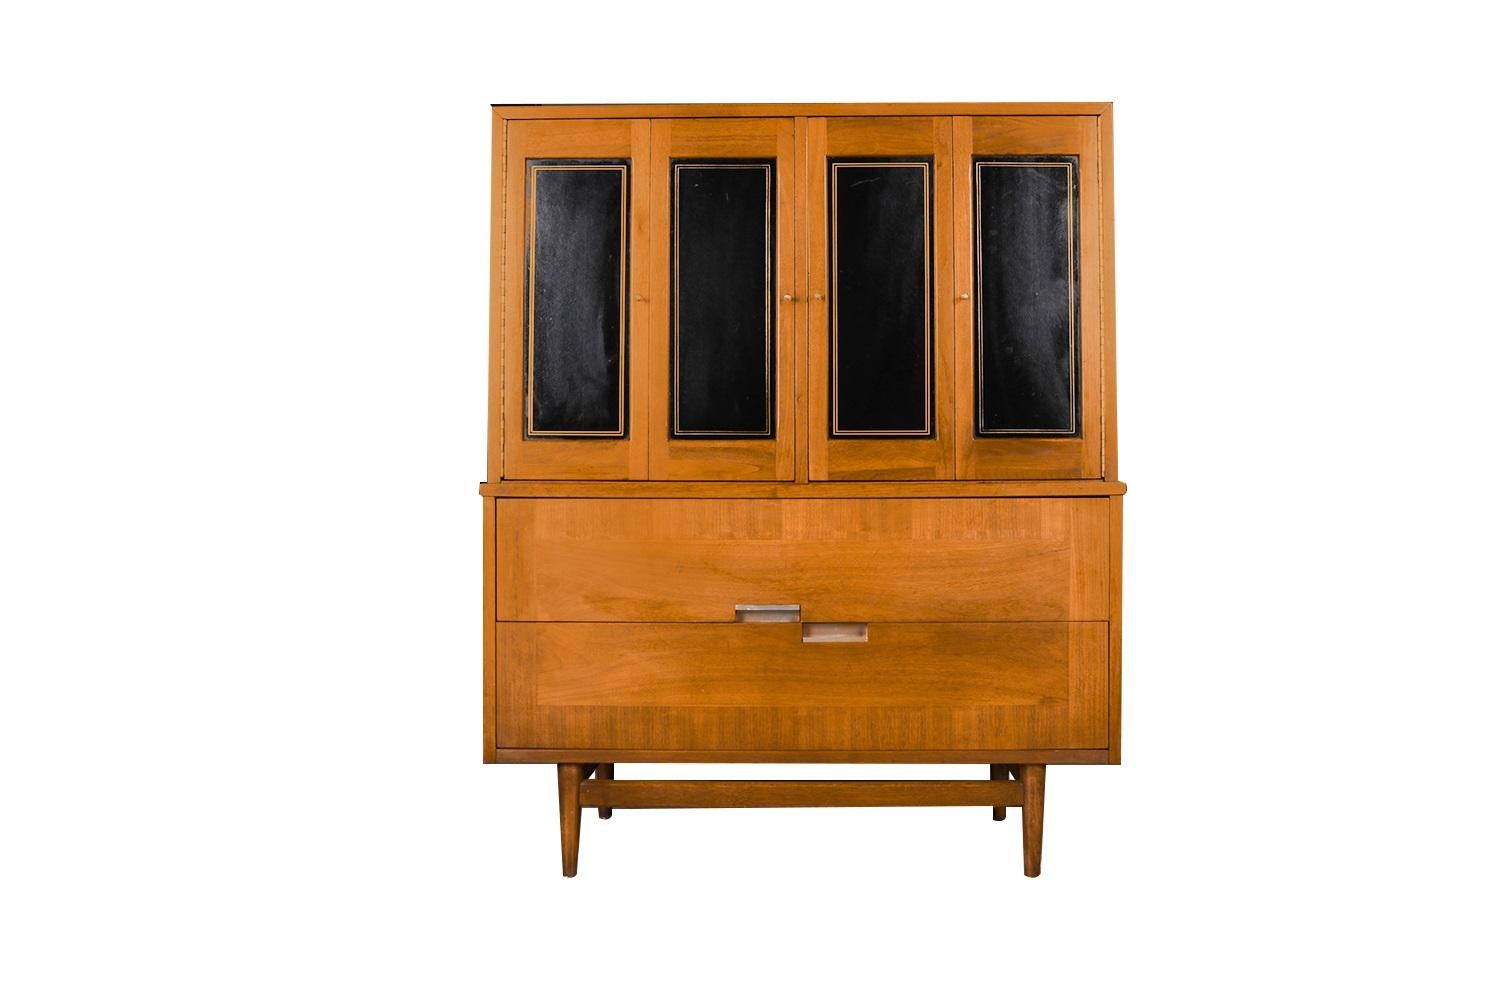 This exceedingly well-crafted American of Martinsville highboy dresser was designed by Merton Gershun for American of Martinsville, features the mid-century style and construction quality that keep these pieces in such high demand today. Beautiful